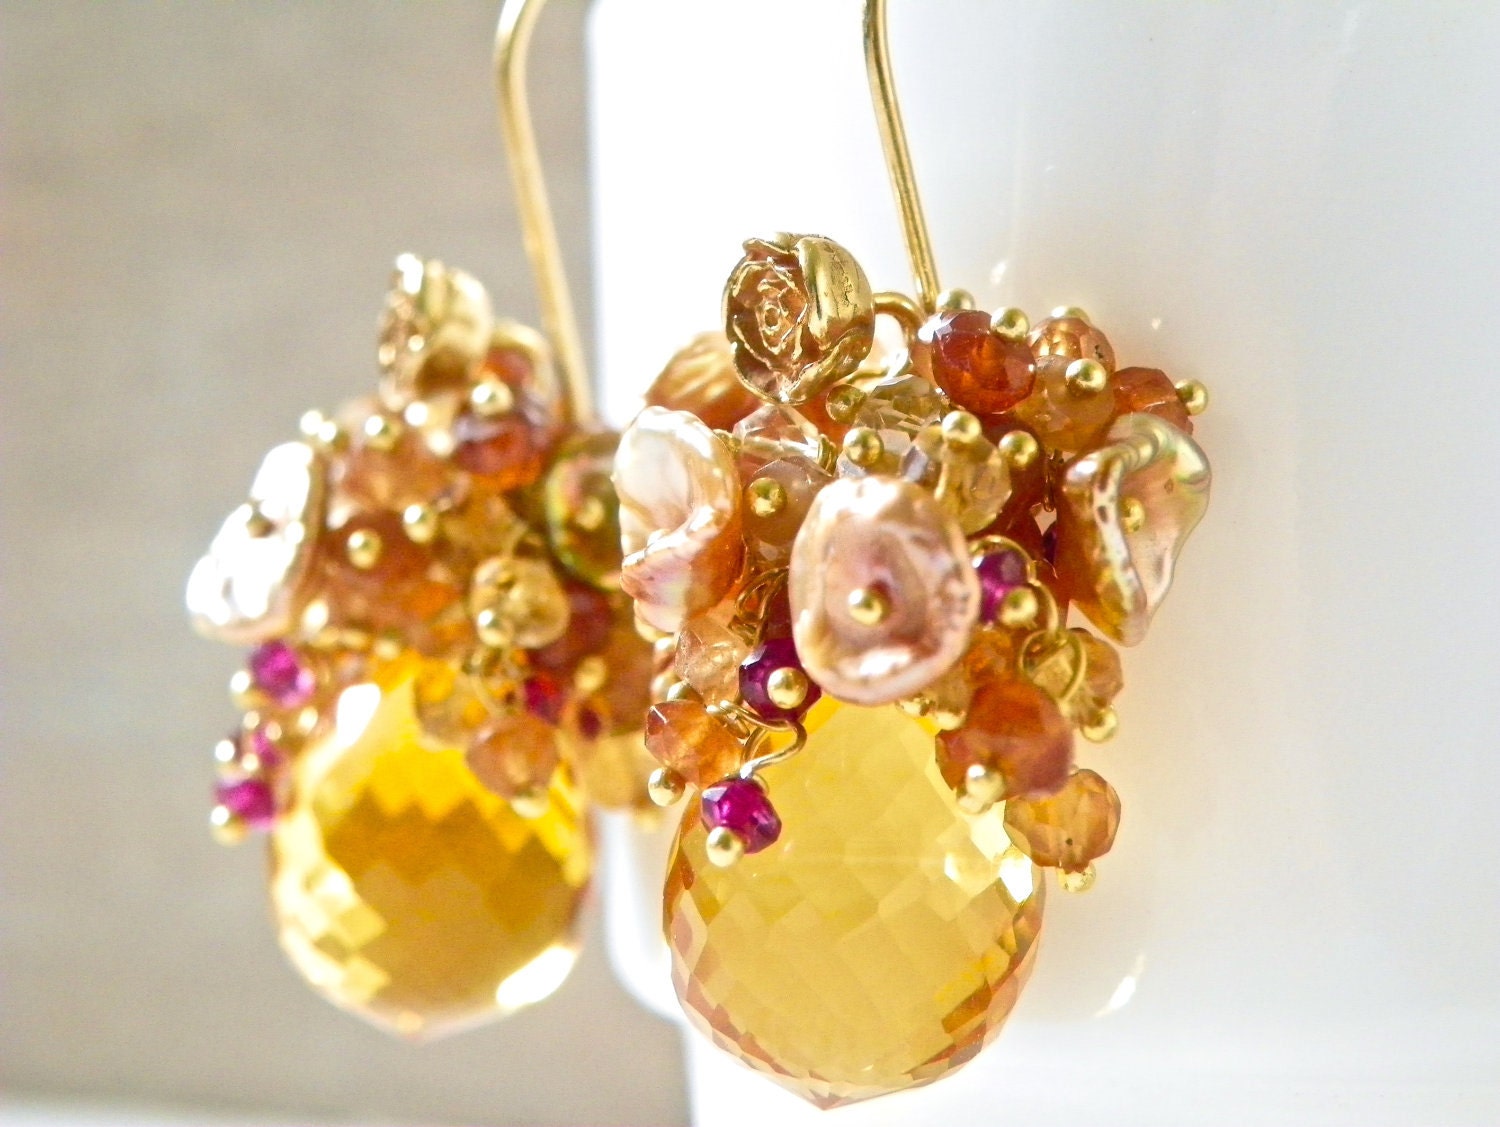 Cluster Earrings with Citrine and 14k Gold. Bright Summer Earrings. Statement Earrings. Free Shipping.